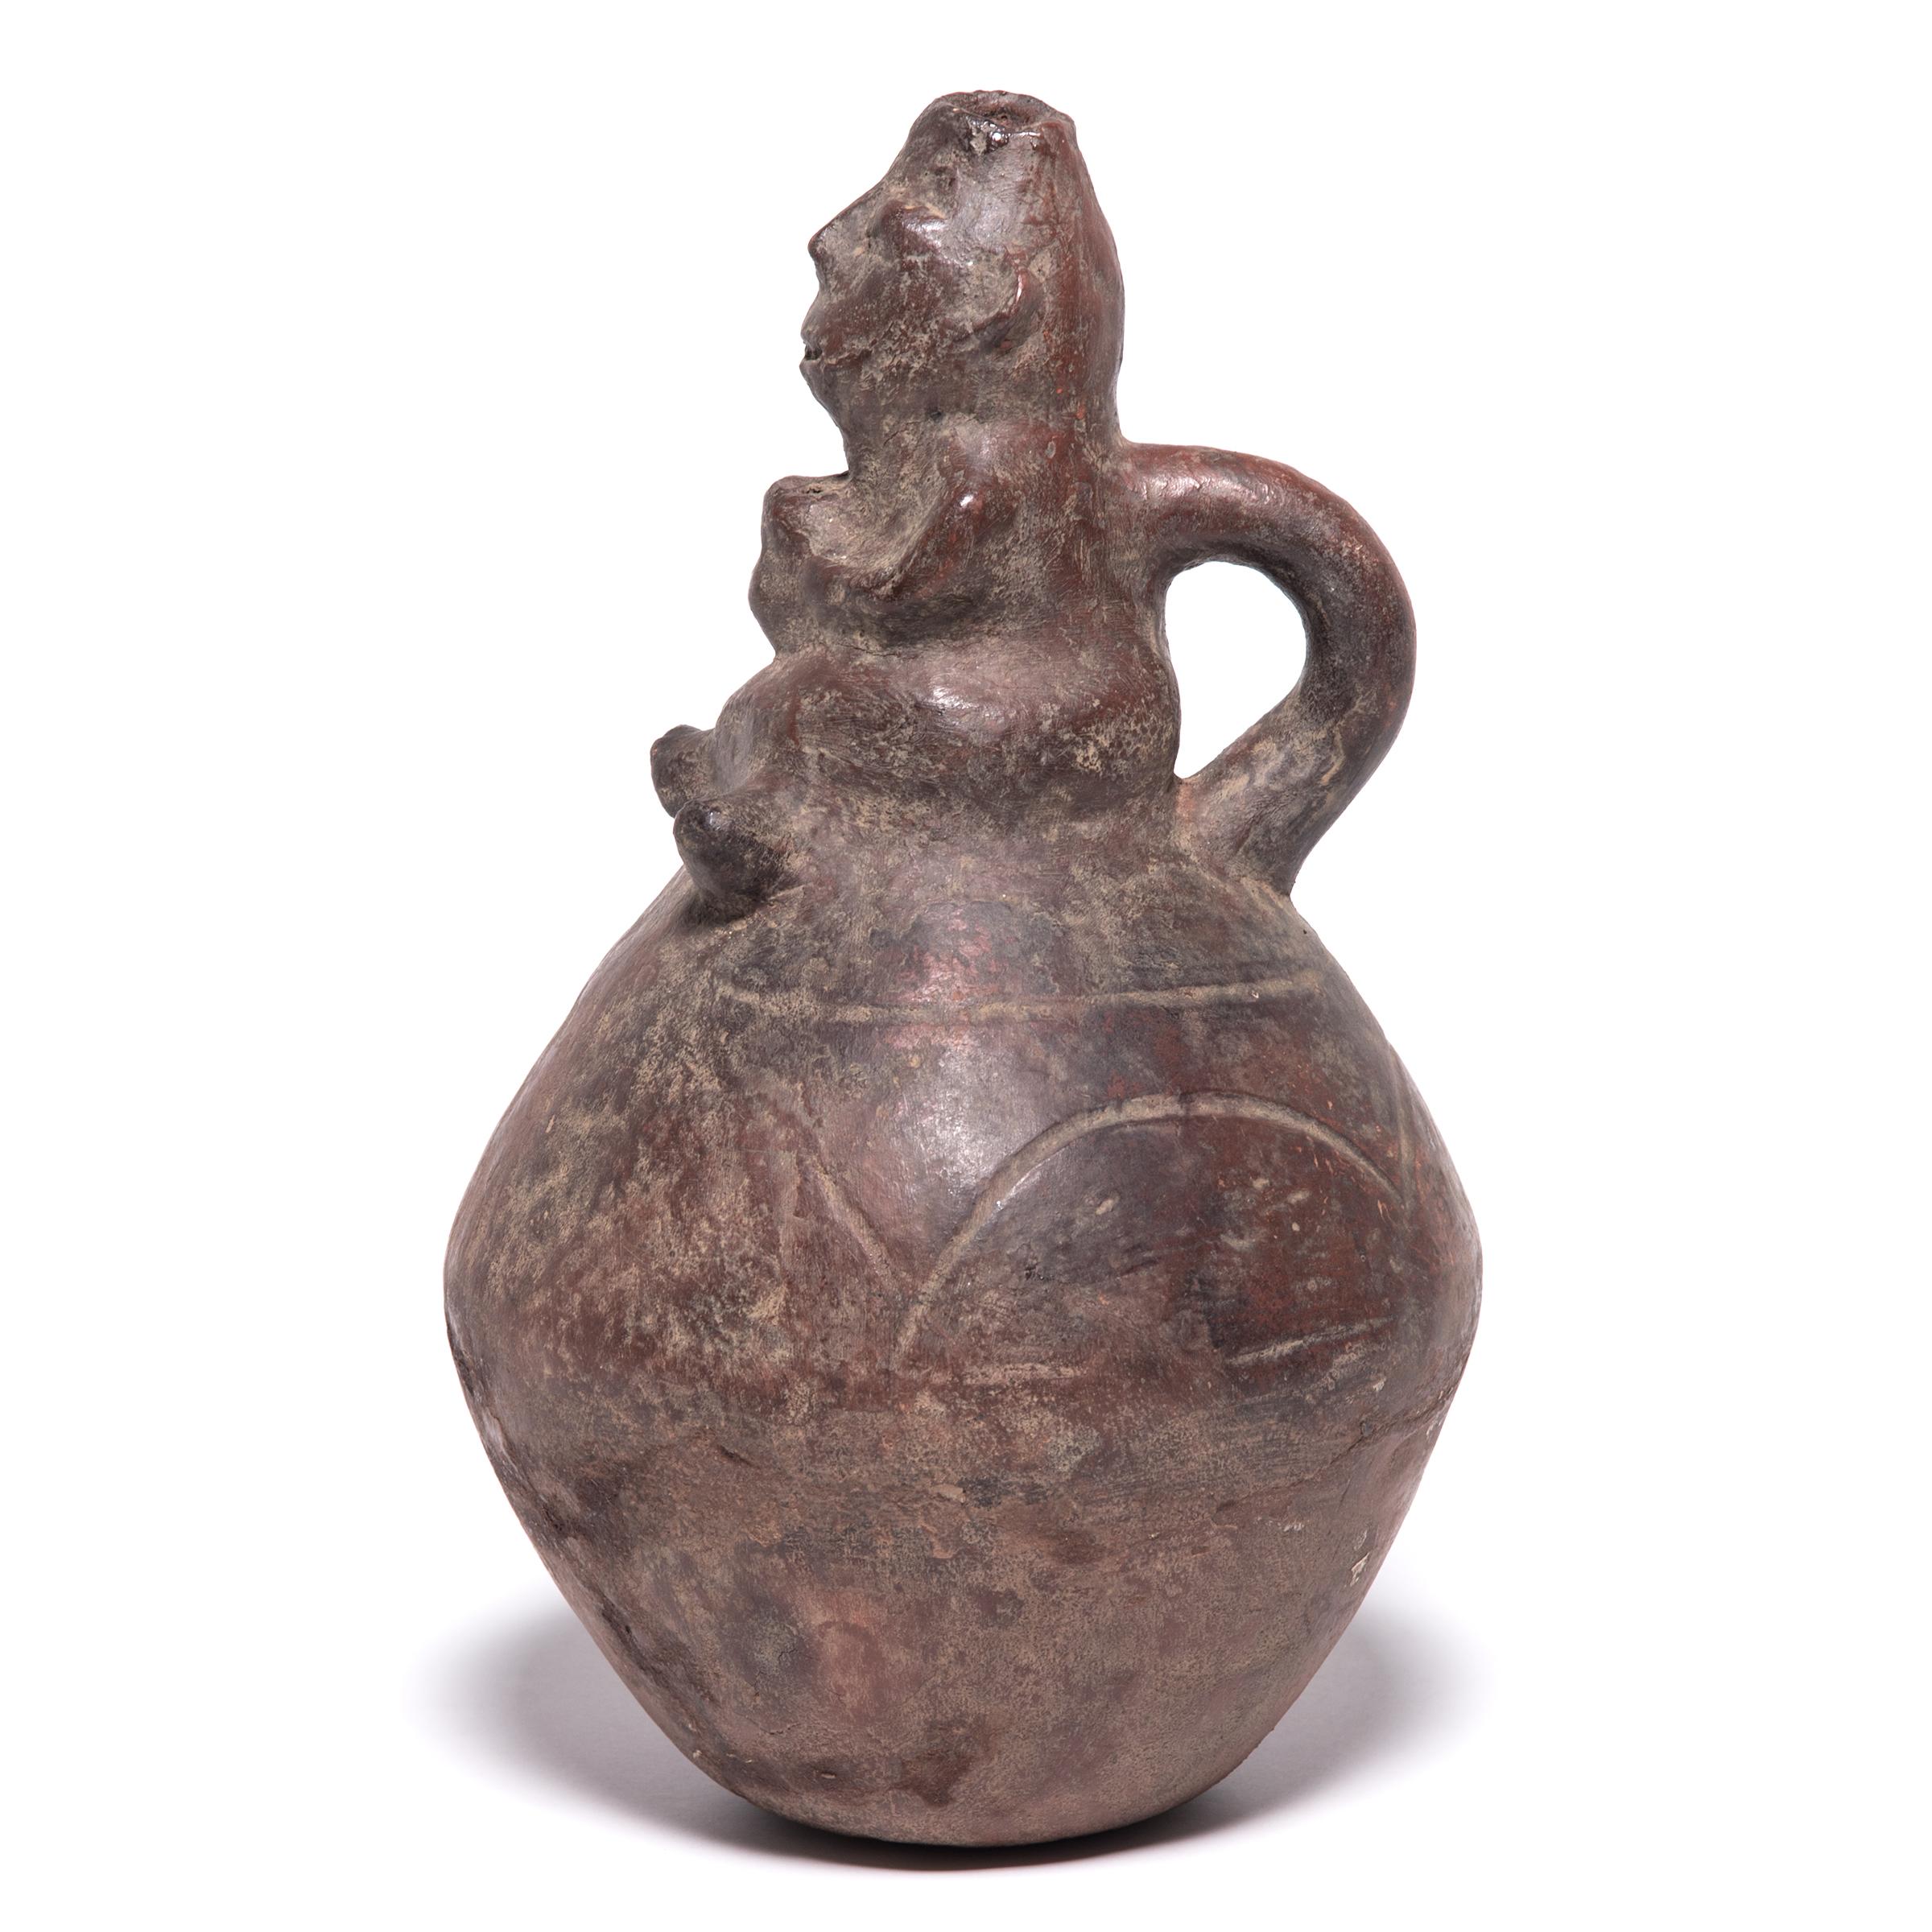 Receiving guidance from tribal ancestors was a central aspect of the Luba people's spiritual practices. This ceramic spiritually significant vessel is topped with a crossed leg figure whose head has an opening critical for a divination ritual. Known